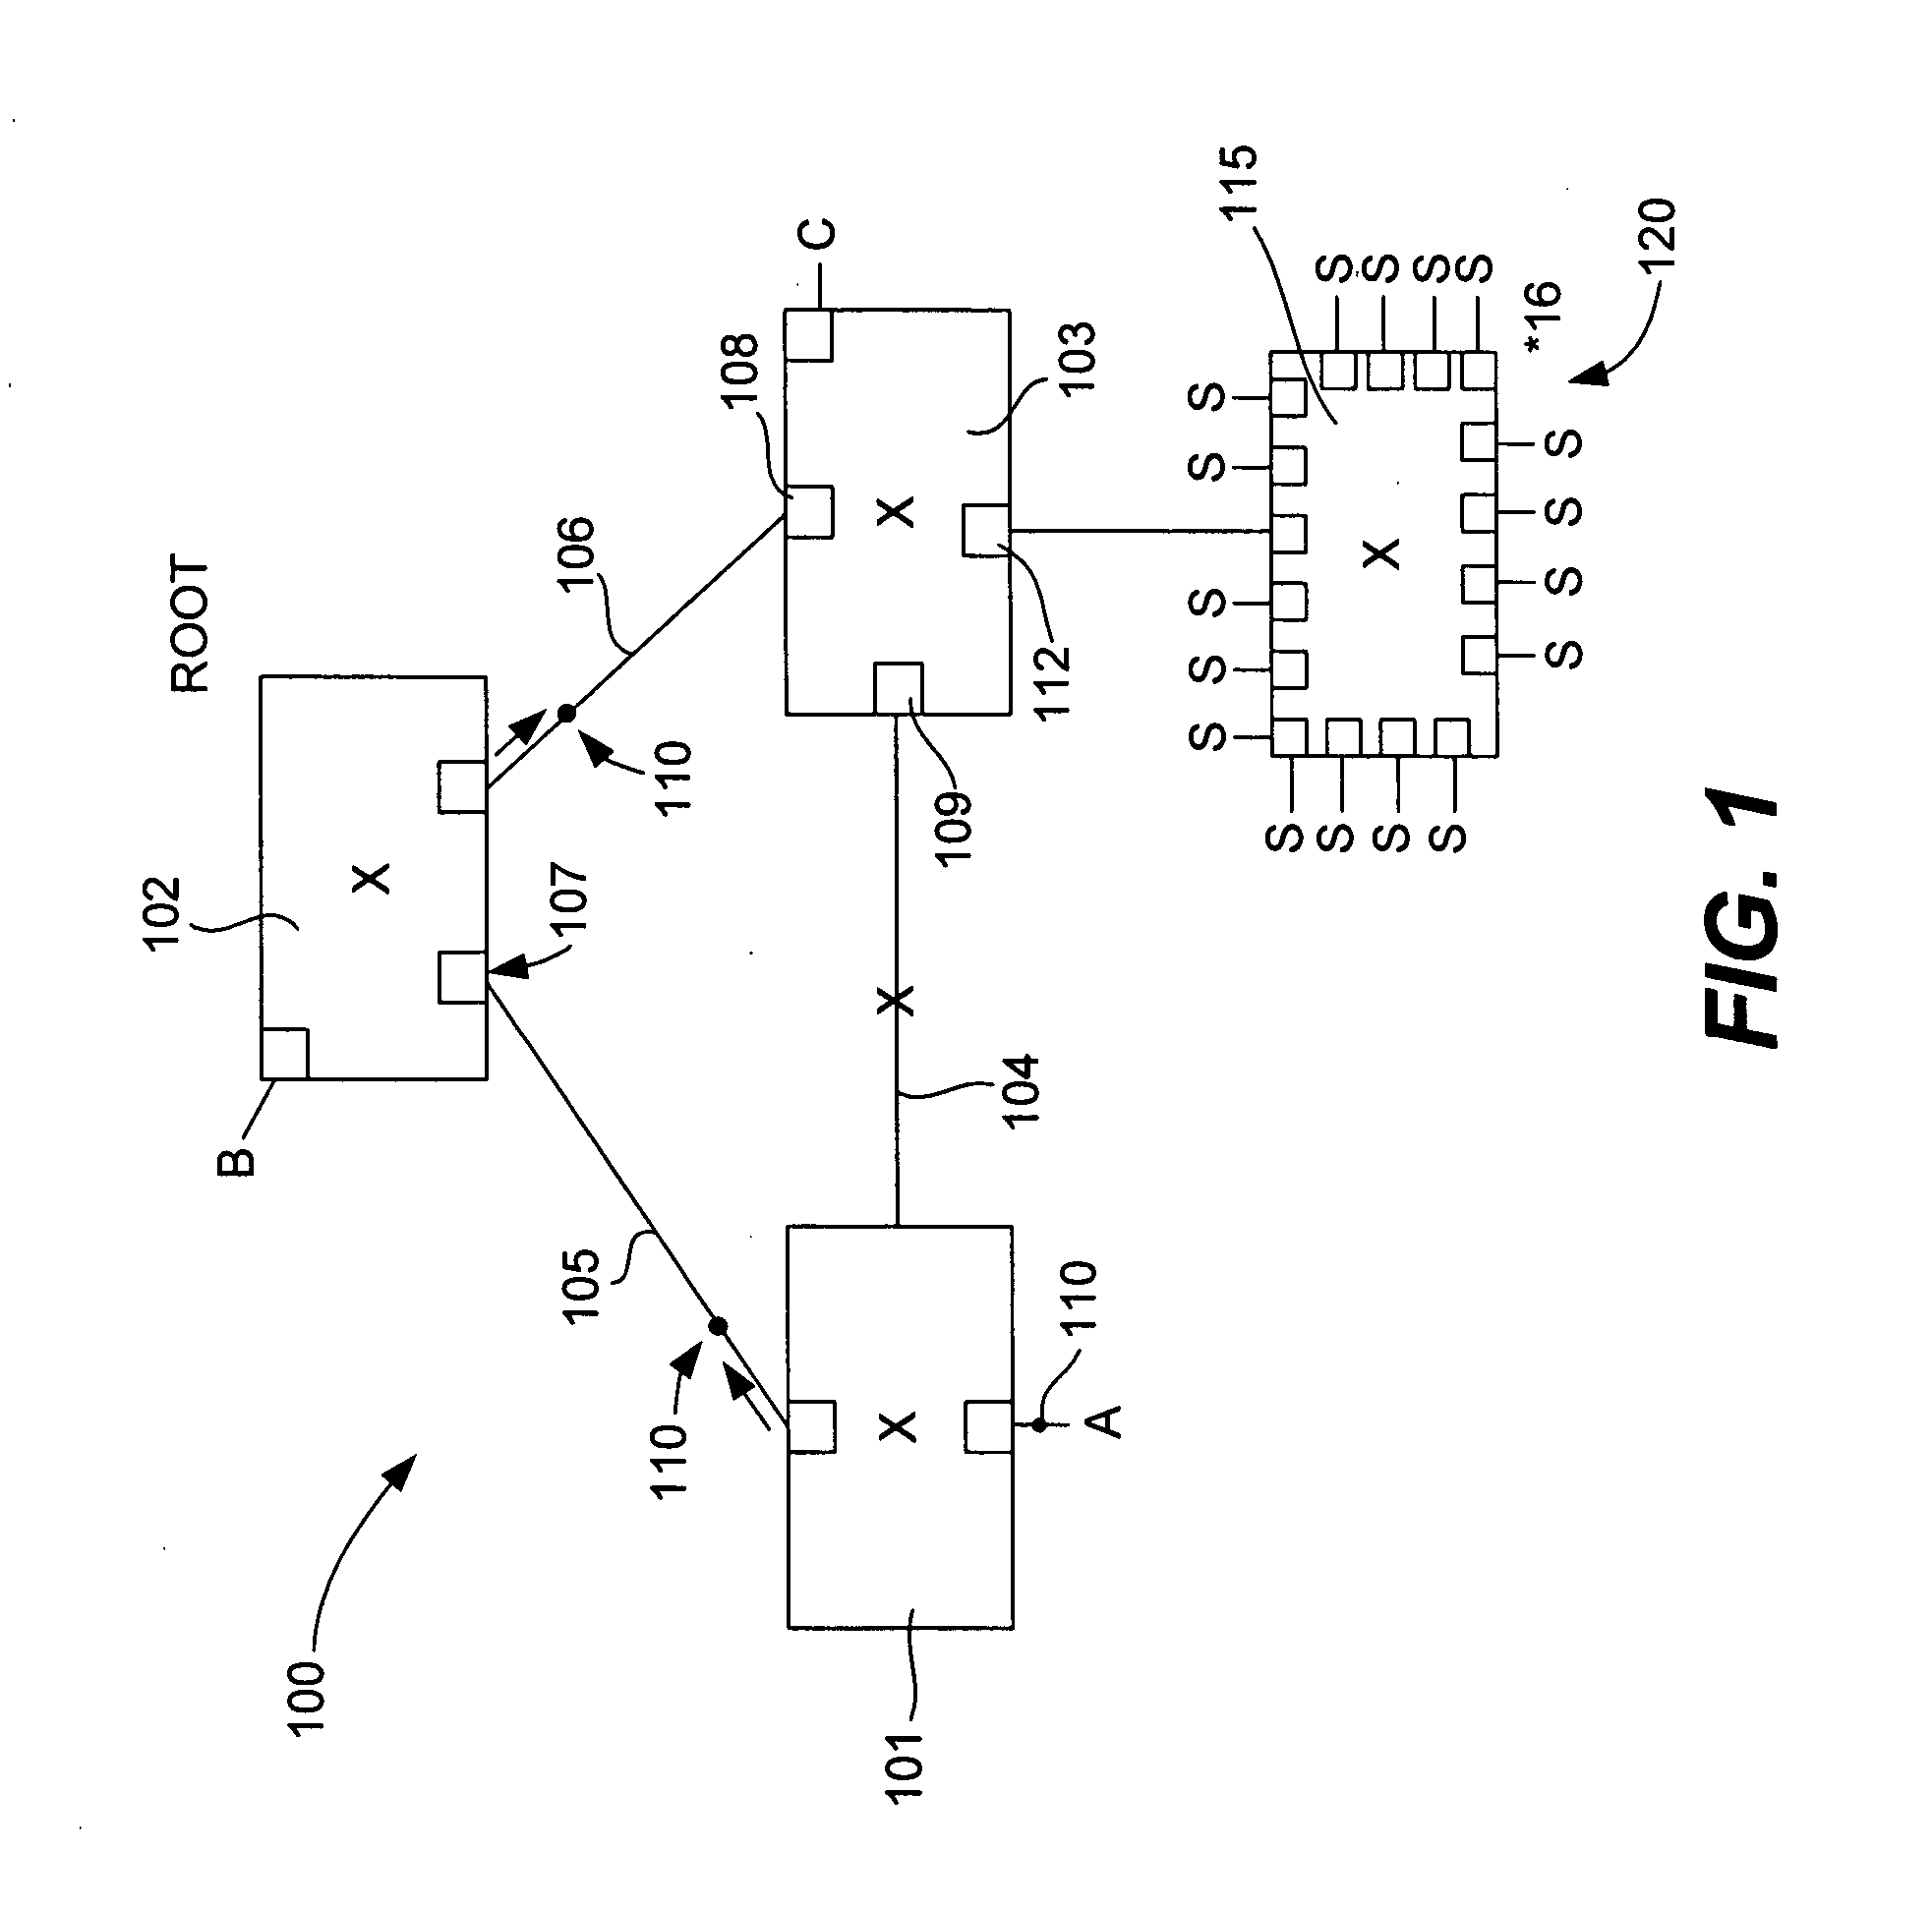 Forwarding table reduction and multipath network forwarding